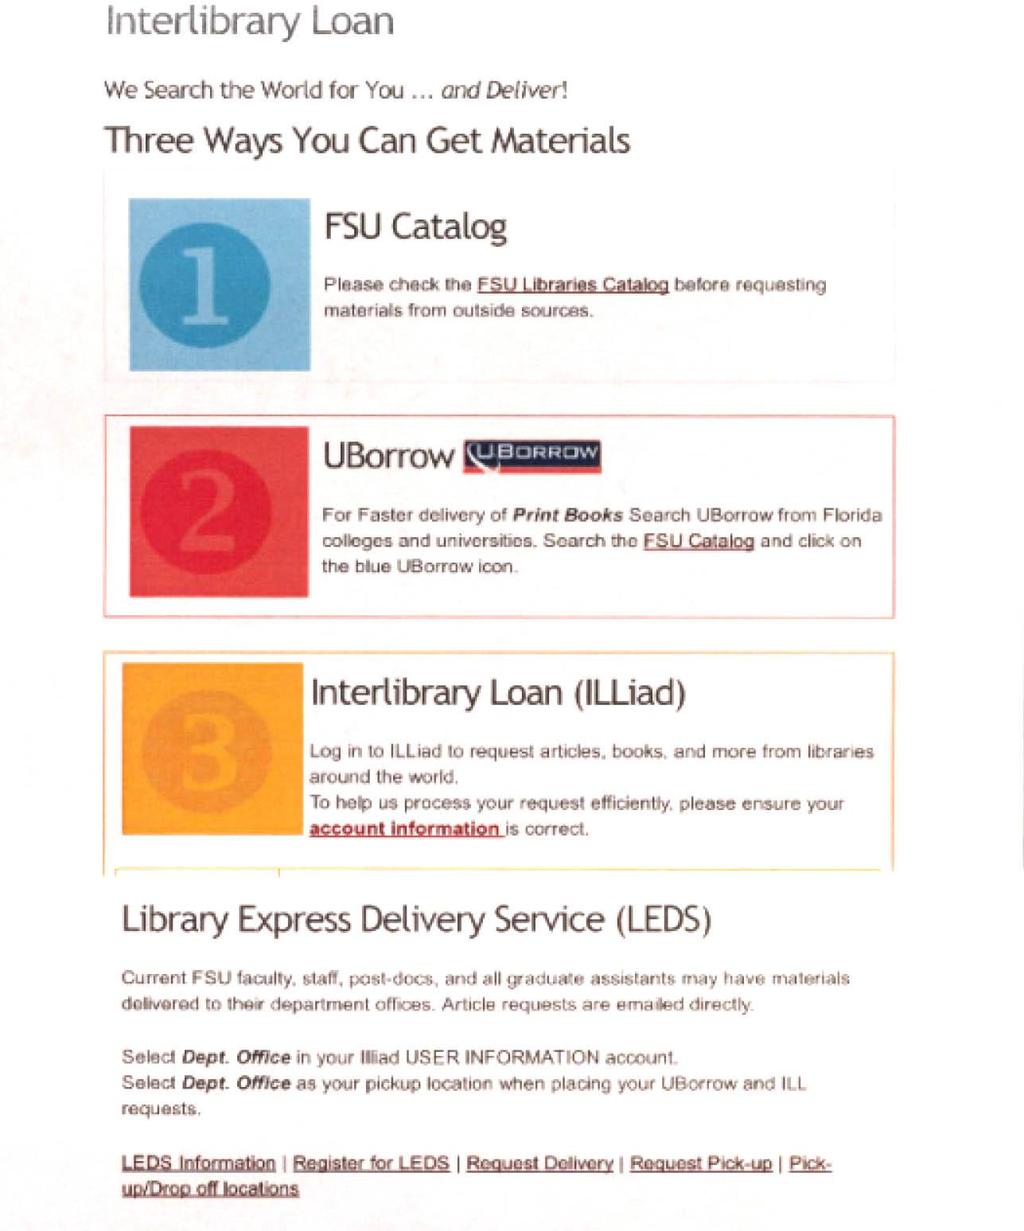 Interlibrary loan These are the steps with interlibrary loan: 1. FSU Catalog Similar to our system the students at first check whether the literature is on the Campus or in Tallahassee.